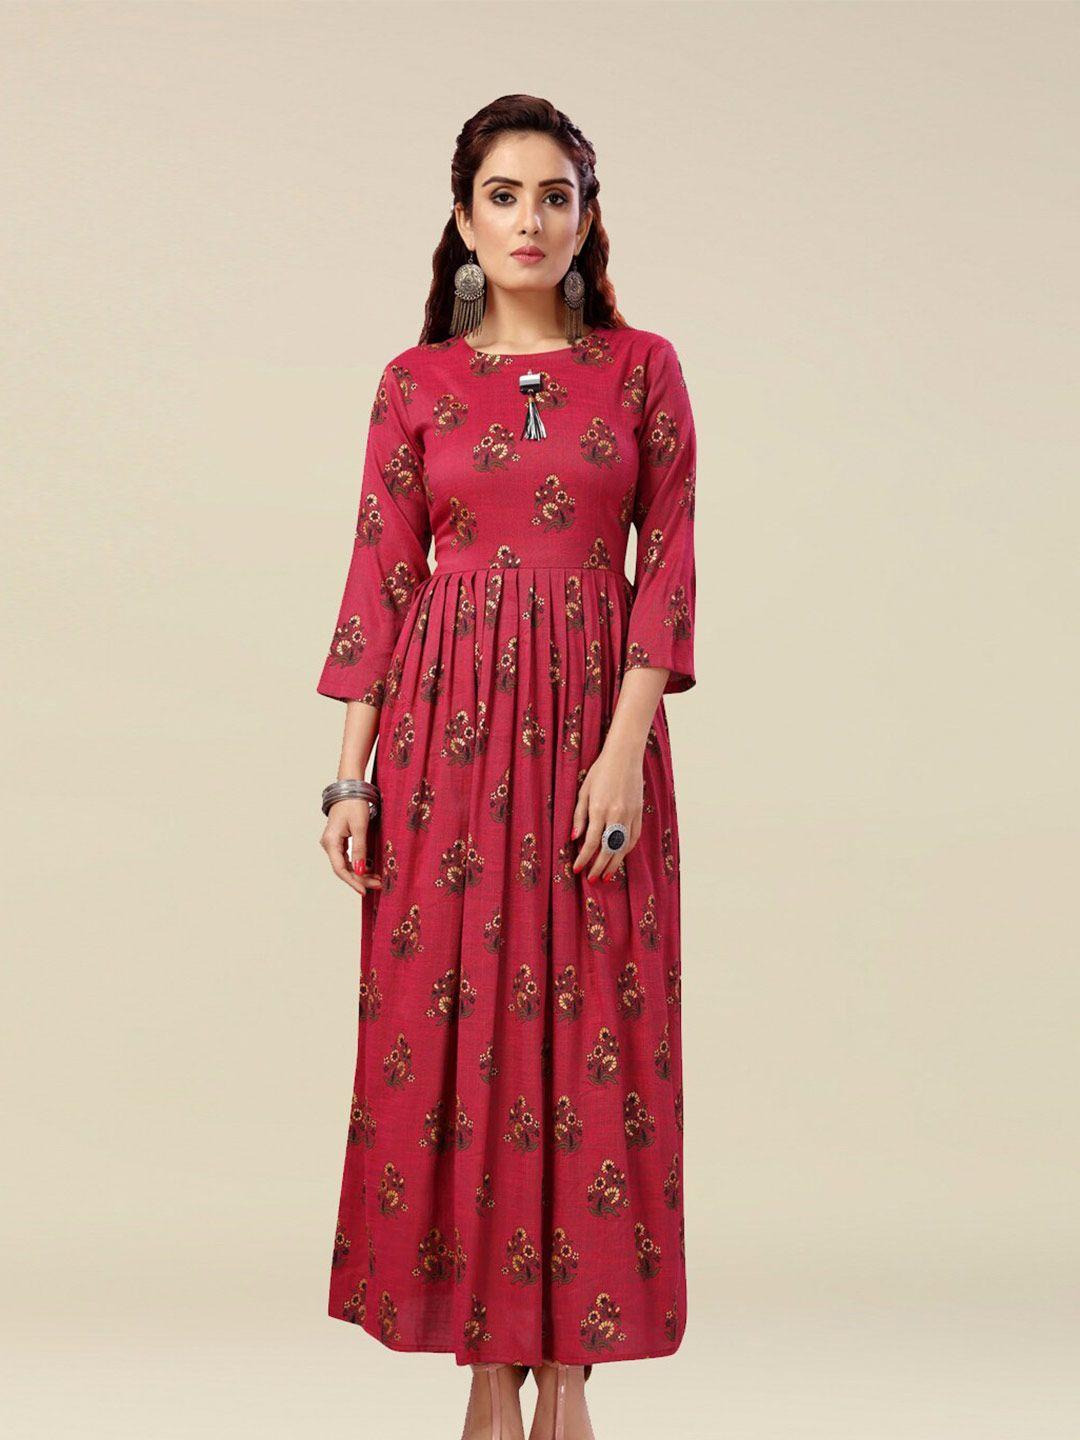 madhuram-ethnic-motif-printed-pleated-maxi-fit-and-flare-ethnic-dress